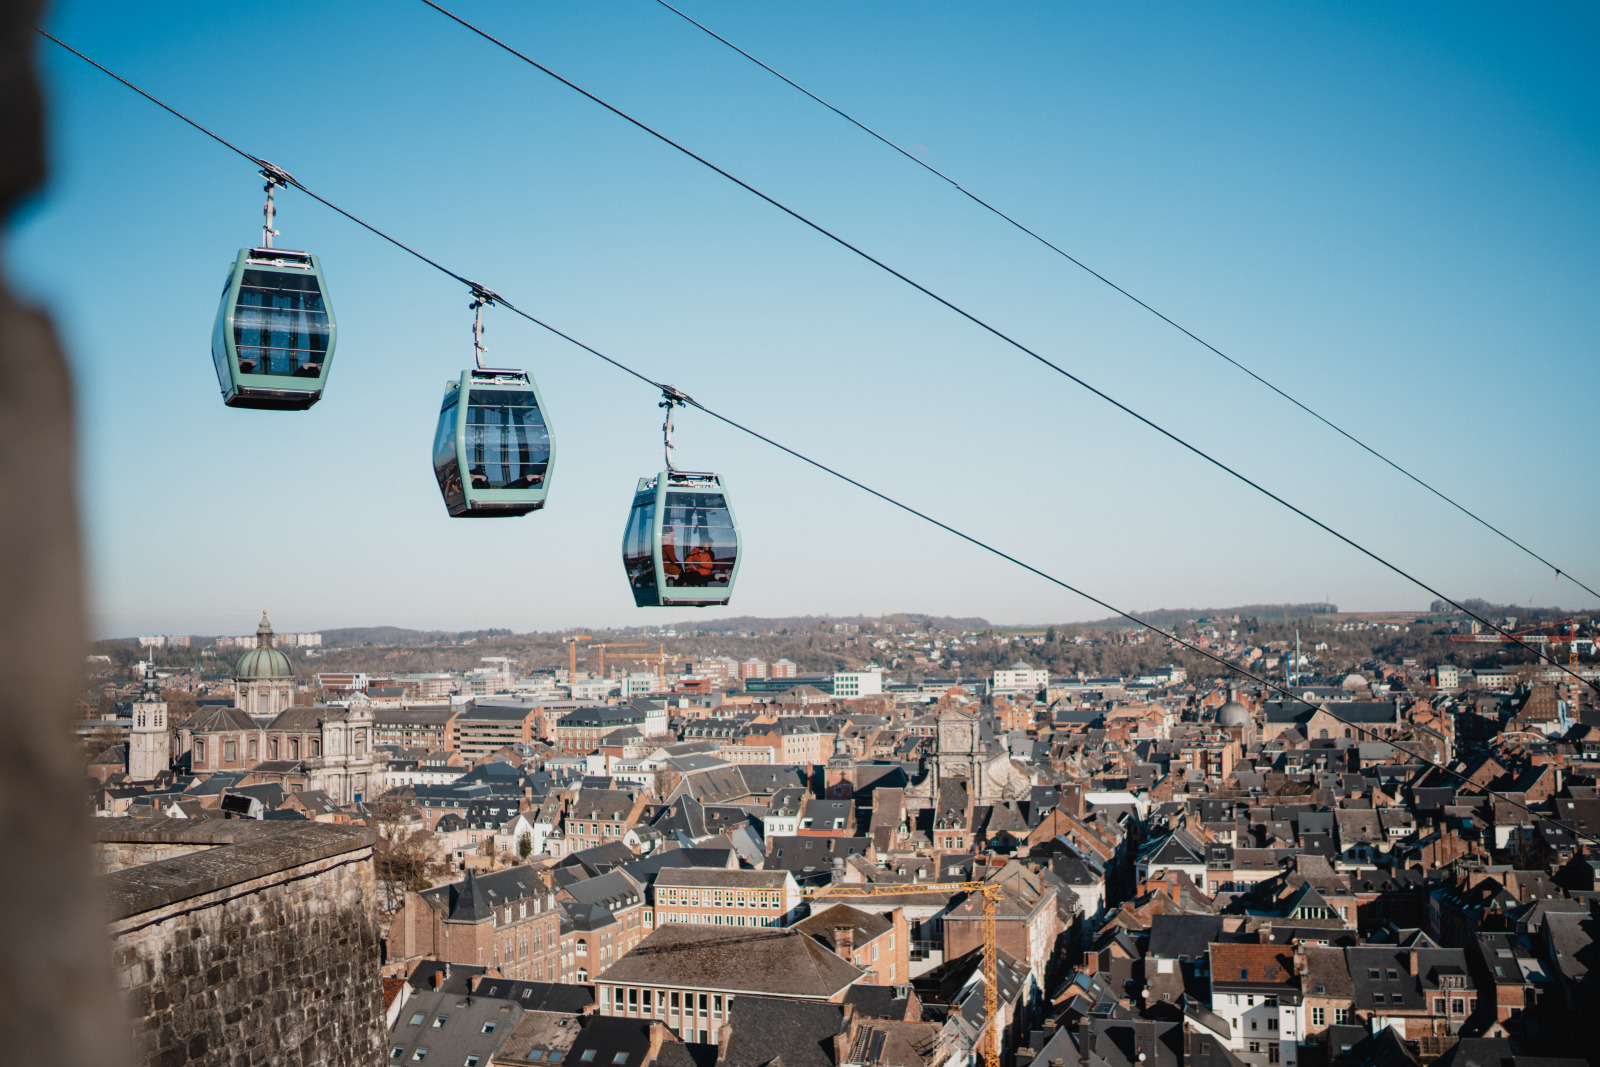 View of the Namur cable car and the city in the background